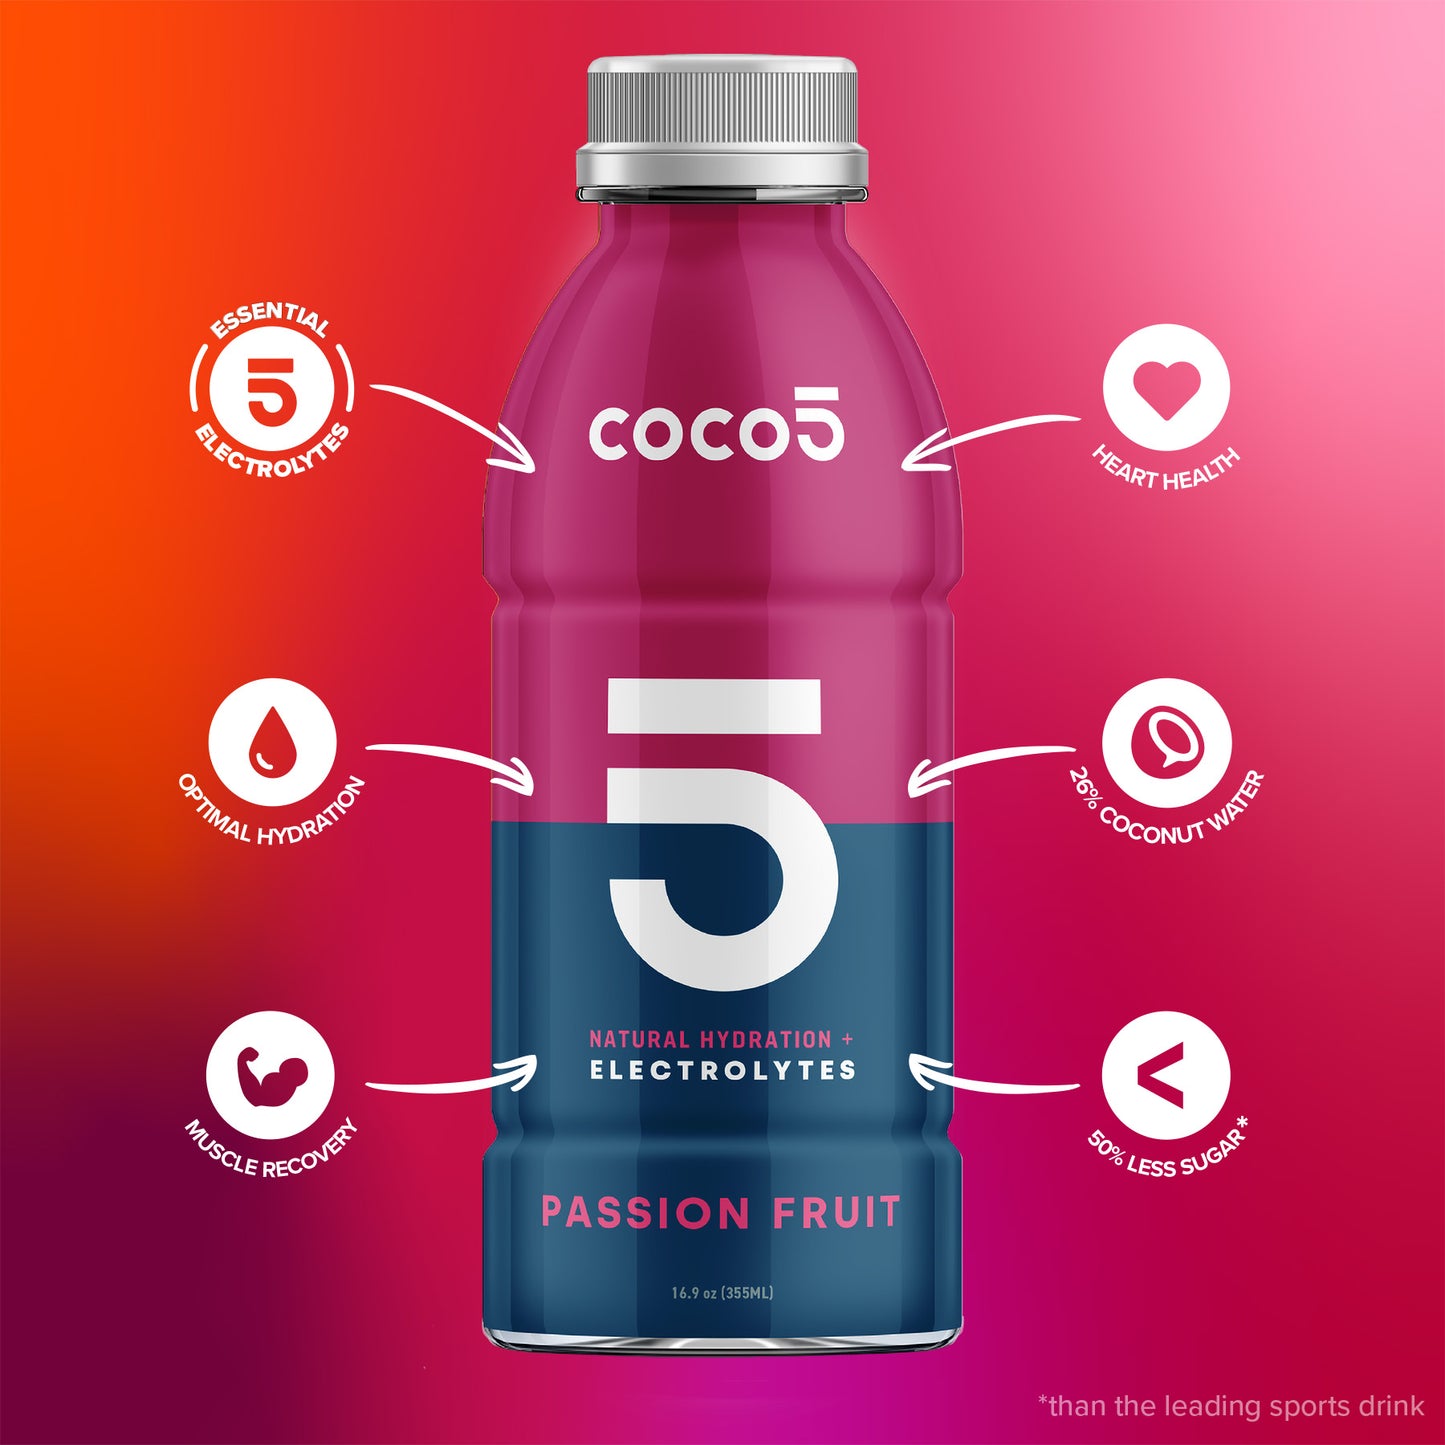 Coco5 Passion Fruit Hydration - 12 Pack